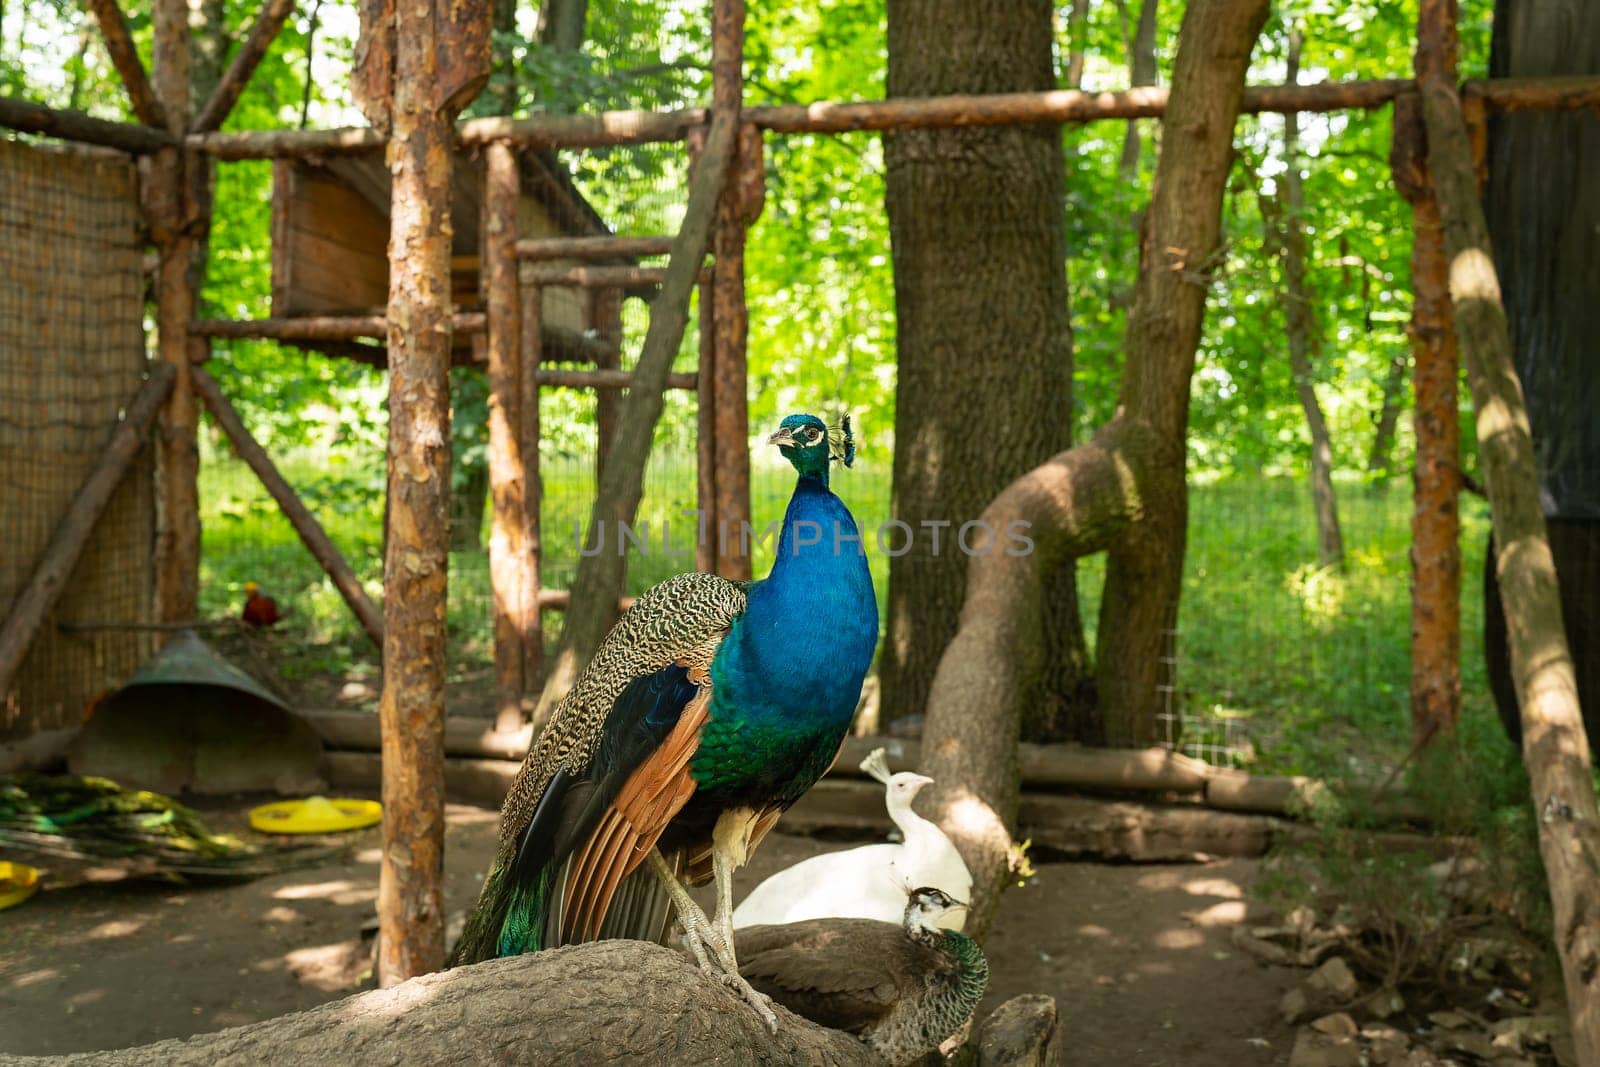 A colorful peacock sat on a wooden fence in a rustic outdoor setting with green foliage and a white peacock tree laying in the background